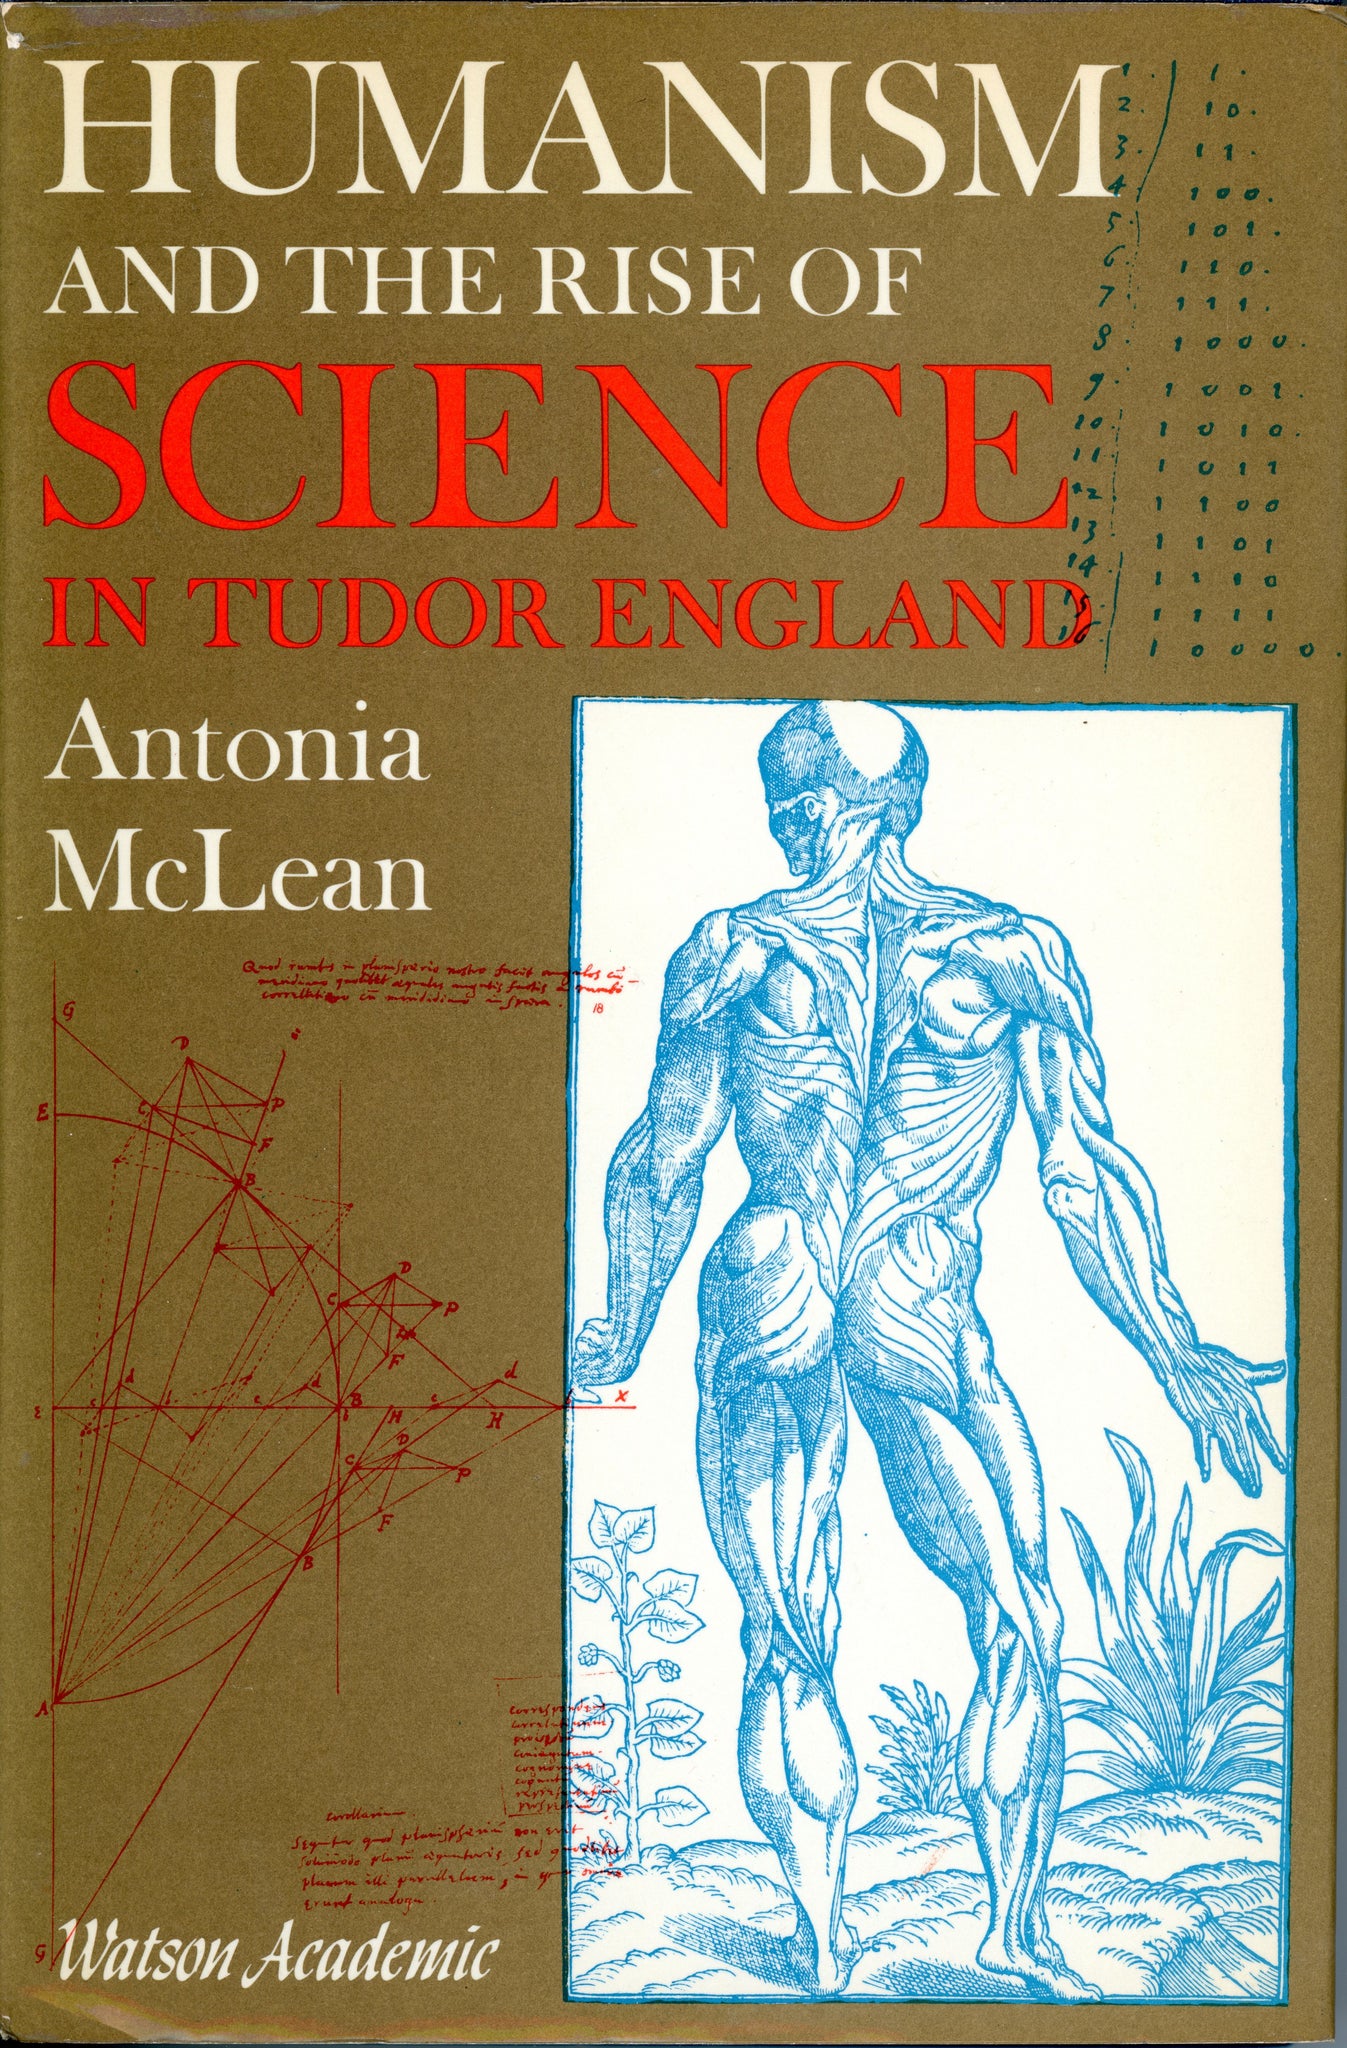 Humanism and the Rise of Science in Tudor England